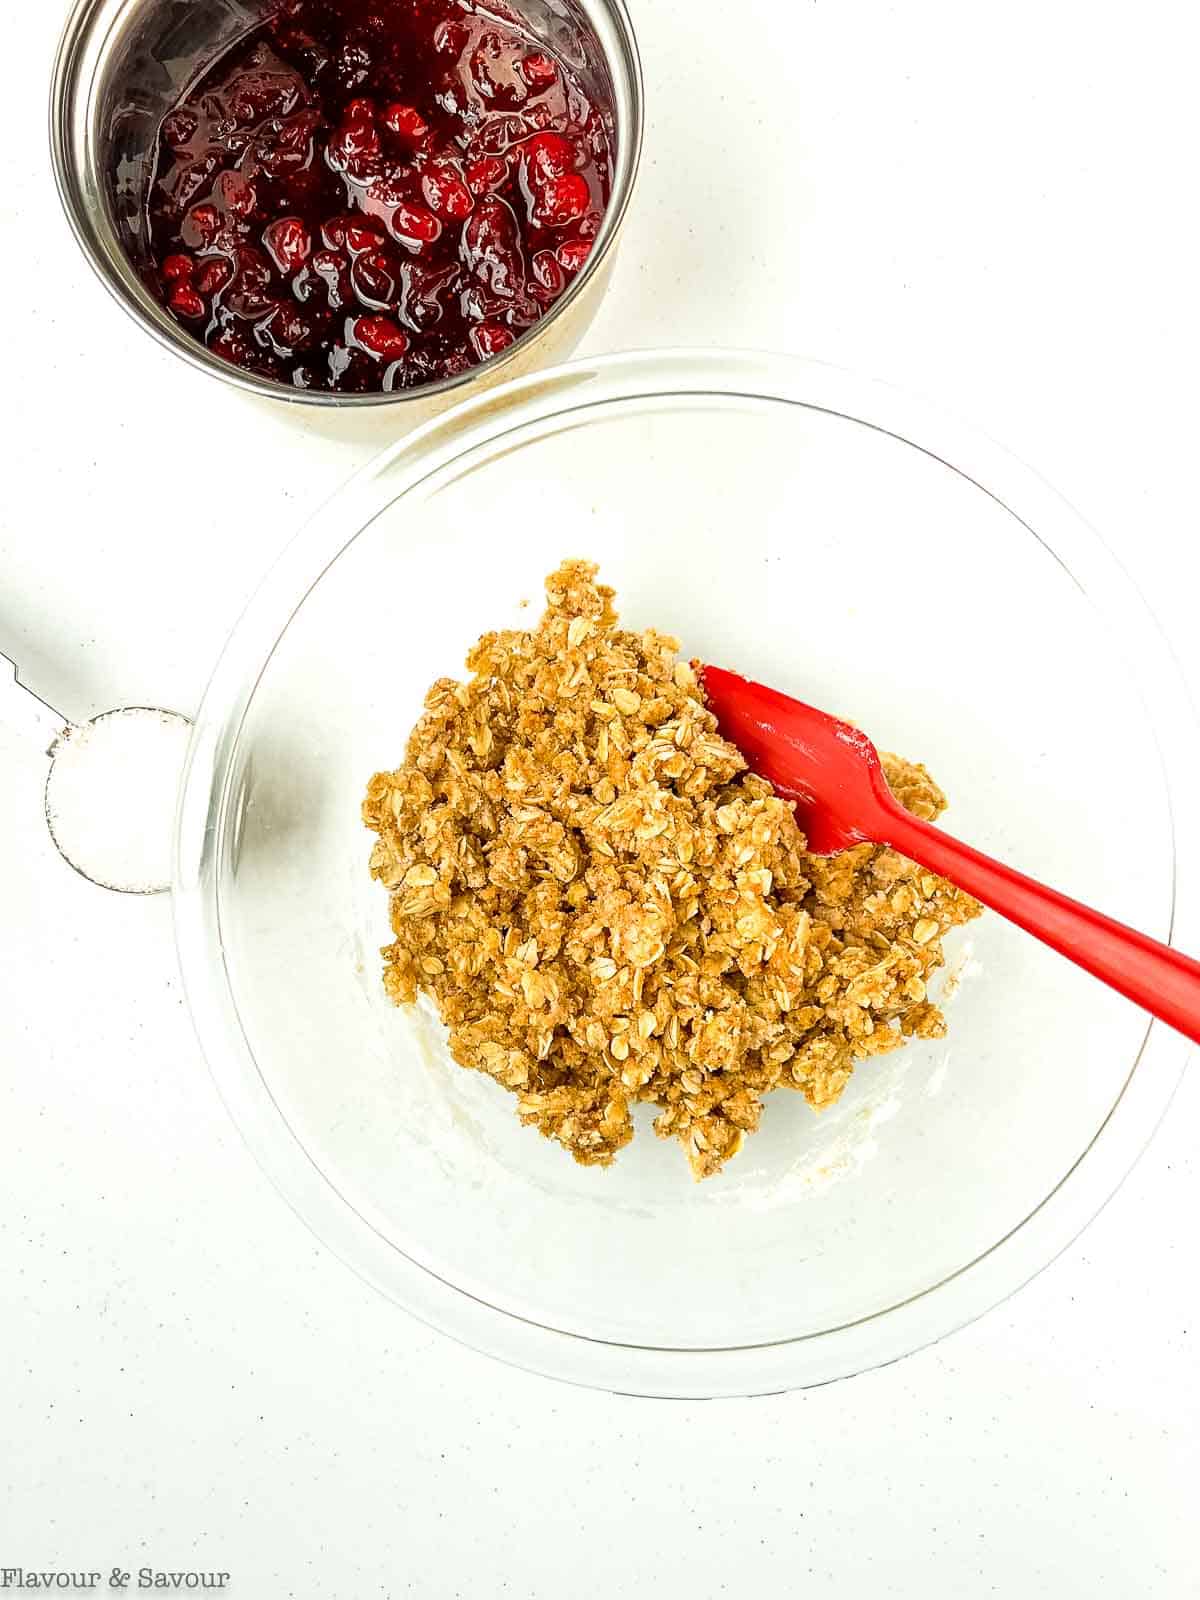 Combining ingredients for the crumble topping for cranberry lemon oatmeal bars.